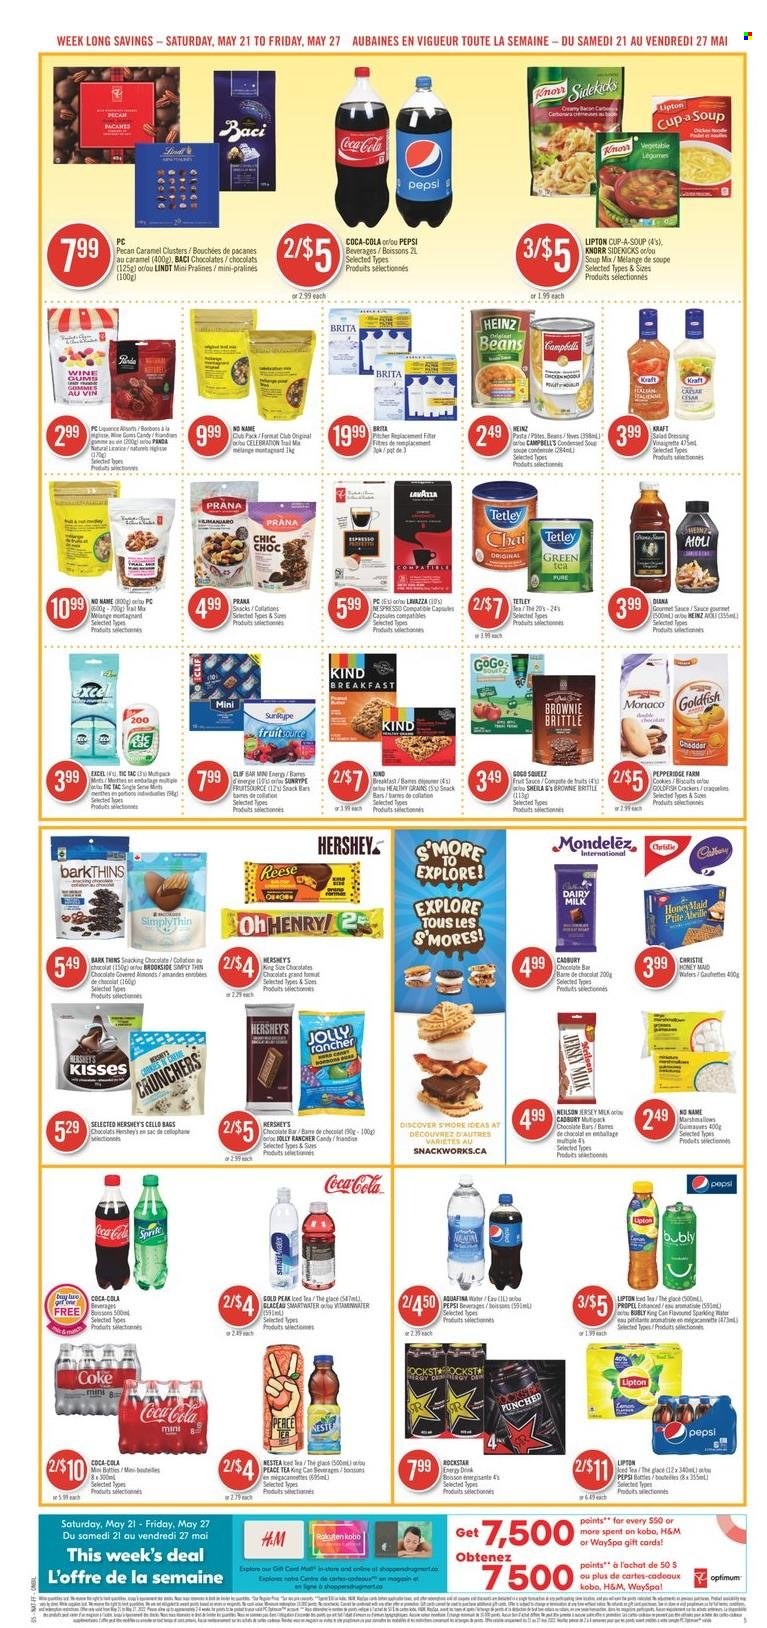 thumbnail - Shoppers Drug Mart Flyer - May 21, 2022 - May 27, 2022 - Sales products - No Name, Campbell's, soup mix, soup, pasta, sauce, Kraft®, ham, Hershey's, cookies, marshmallows, snack, brownies, Celebration, crackers, biscuit, Cadbury, Dairy Milk, Tic Tac, snack bar, chocolate bar, Thins, Goldfish, beans, Honey Maid, salad dressing, vinaigrette dressing, dressing, almonds, Coca-Cola, Sprite, Pepsi, ice tea, Rockstar, Aquafina, Smartwater, green tea, Nespresso, Lavazza, Carbona, Sure, cup, Optimum, Heinz, pralines, Lipton, Knorr, Lindt. Page 7.